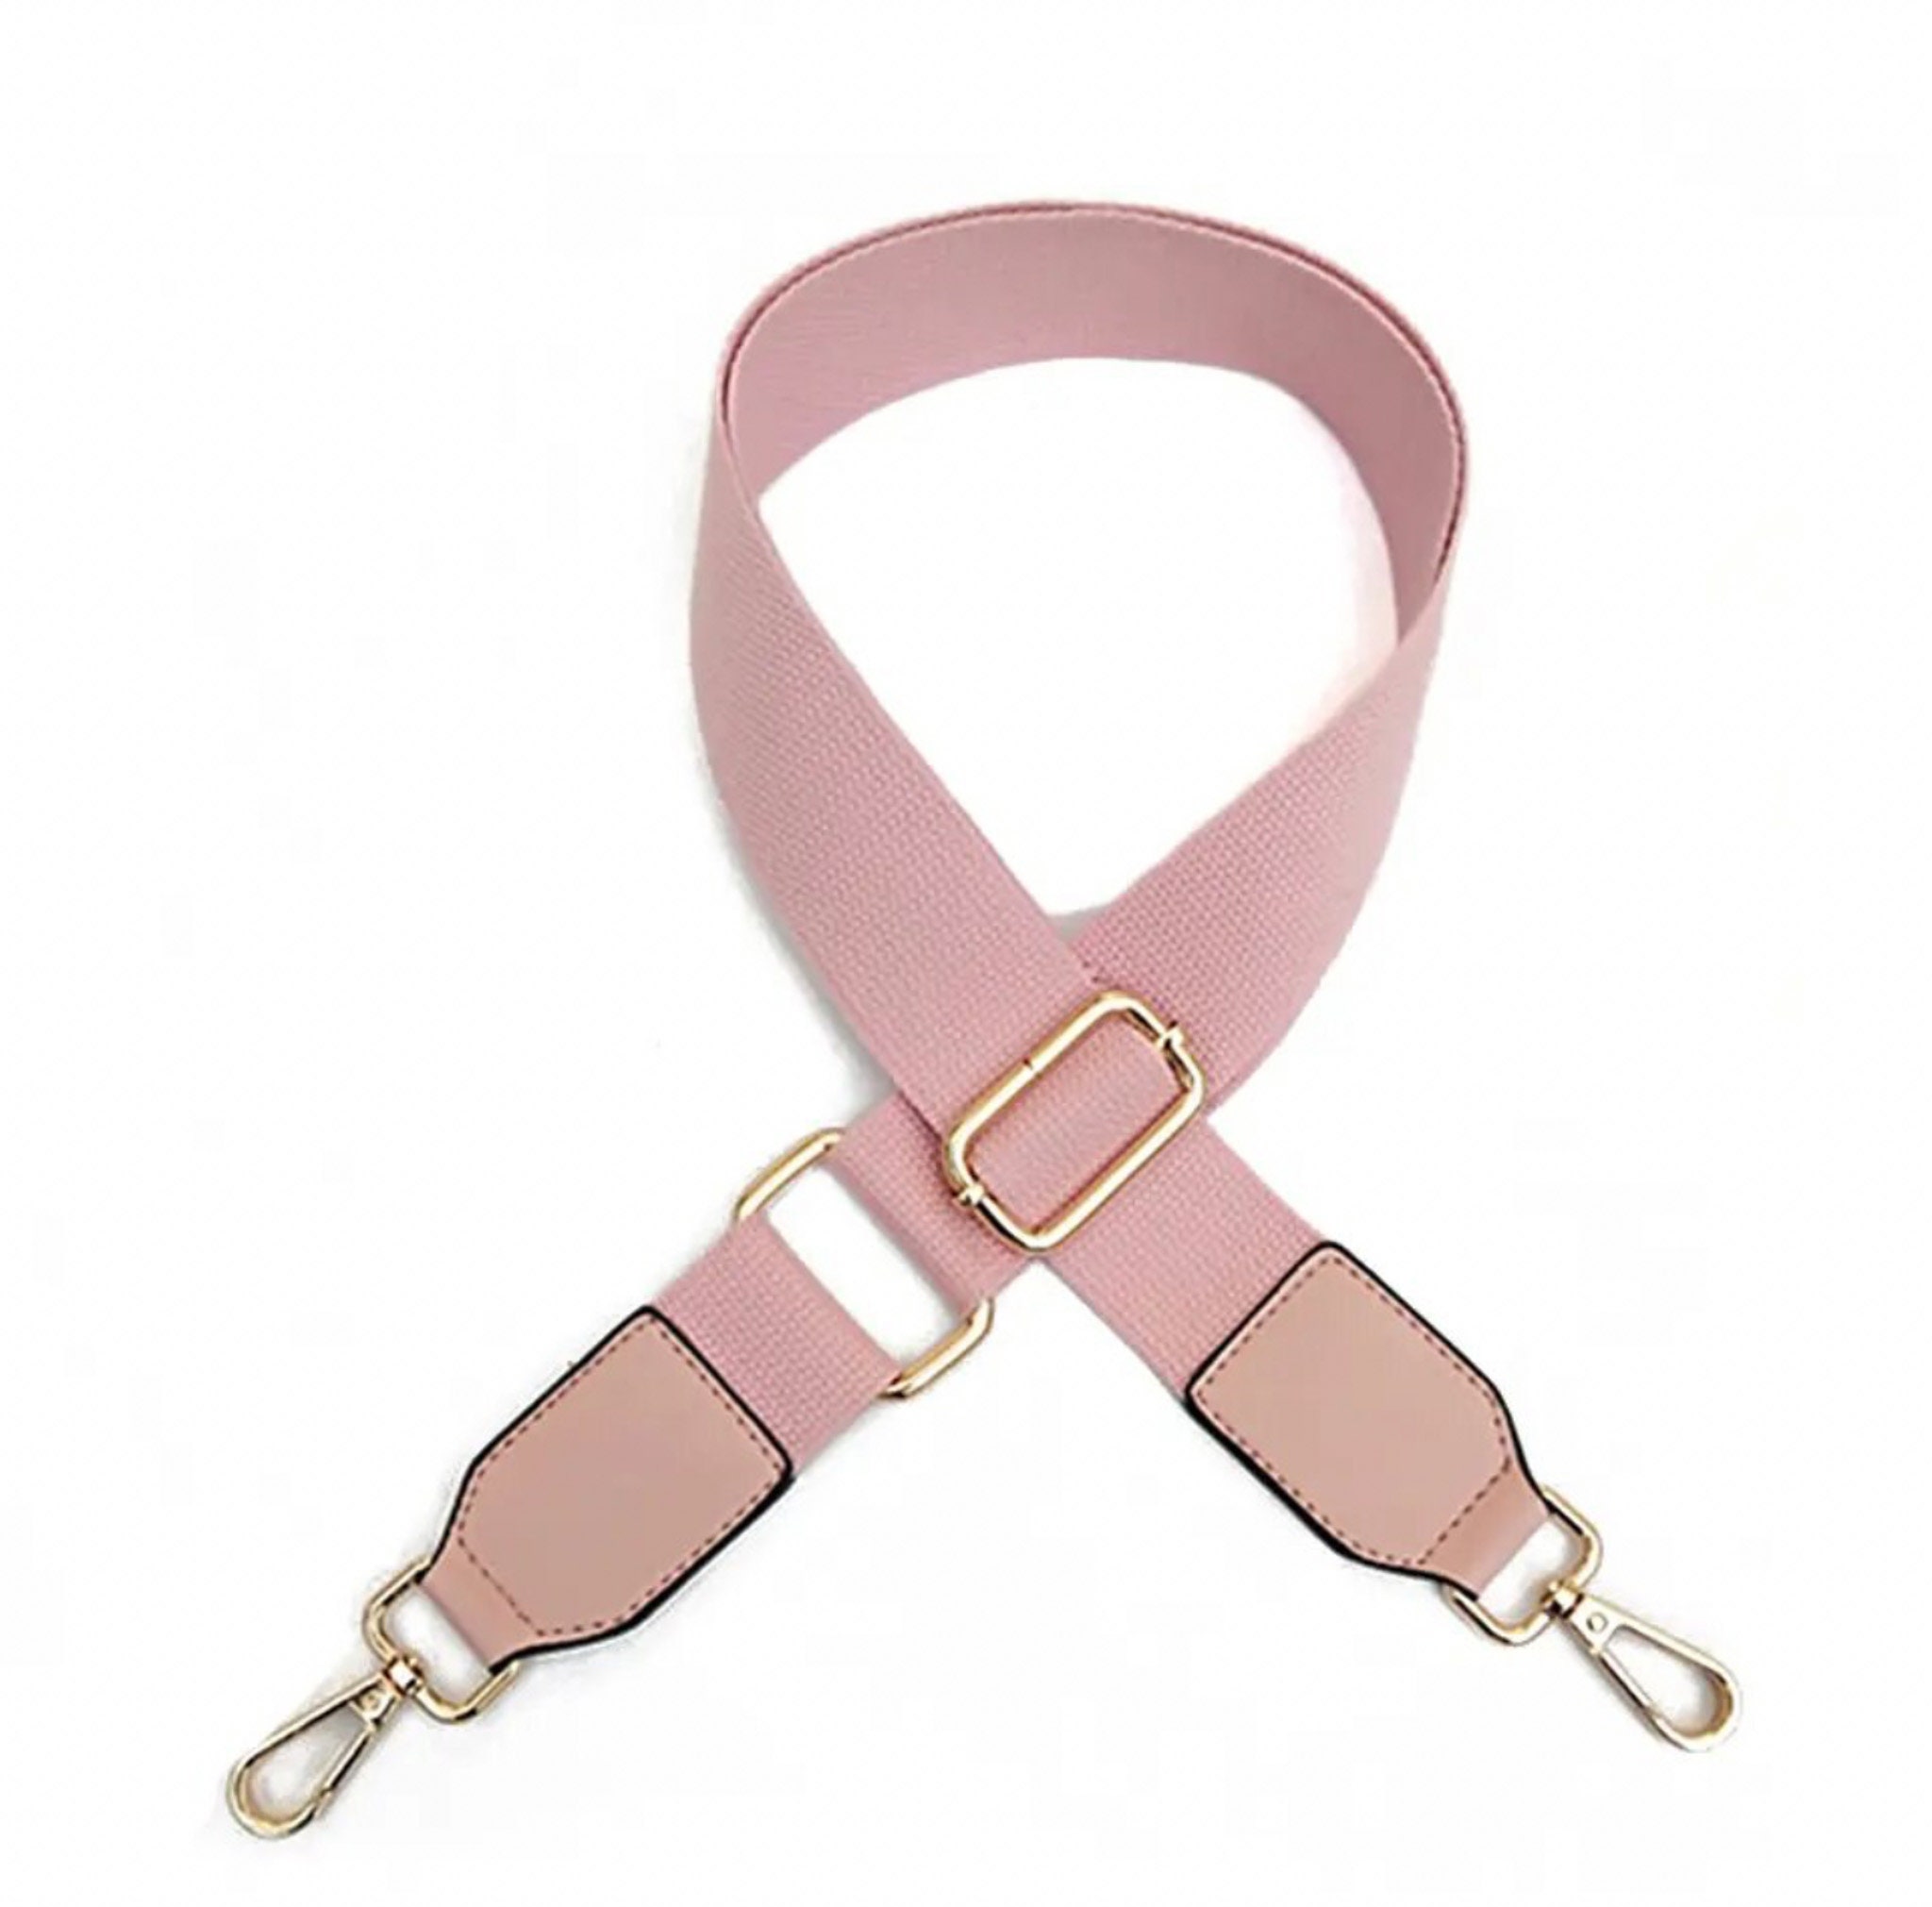  OTCO Purse Straps Replacement Crossbody Straps For Purses,Light  Pink Wide Shoulder Strap For Bags,Guitar Straps For Handbags,Nylon Backpack  Replacement Straps Luggage Straps For Women : Clothing, Shoes & Jewelry